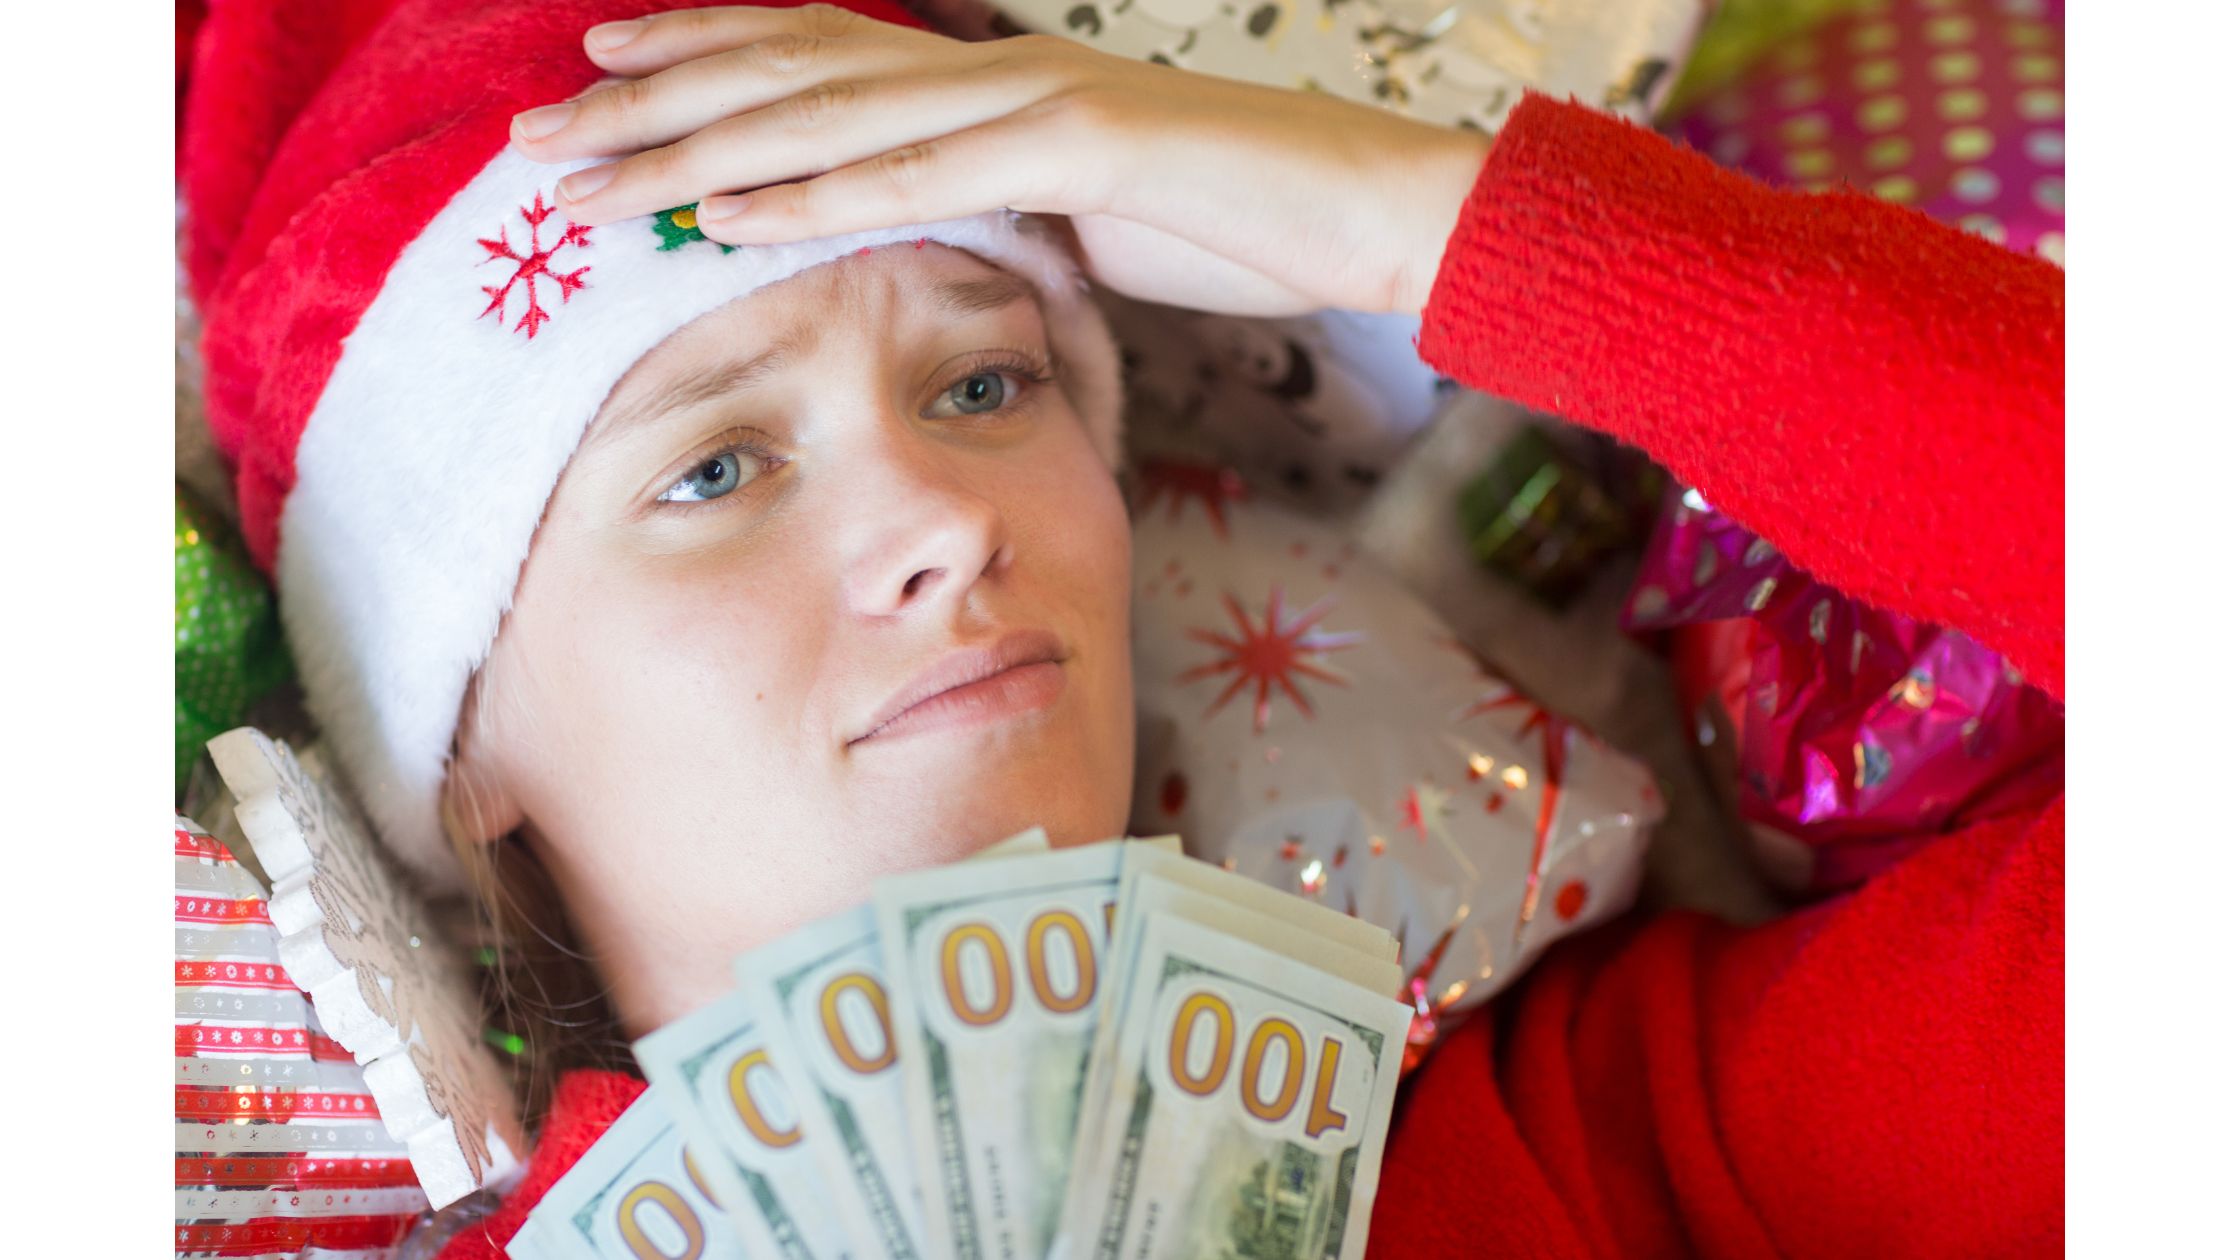 Stepmom in a red Christmas suit, 100 dollar bills in her hands, finding ways to set a sensile budget